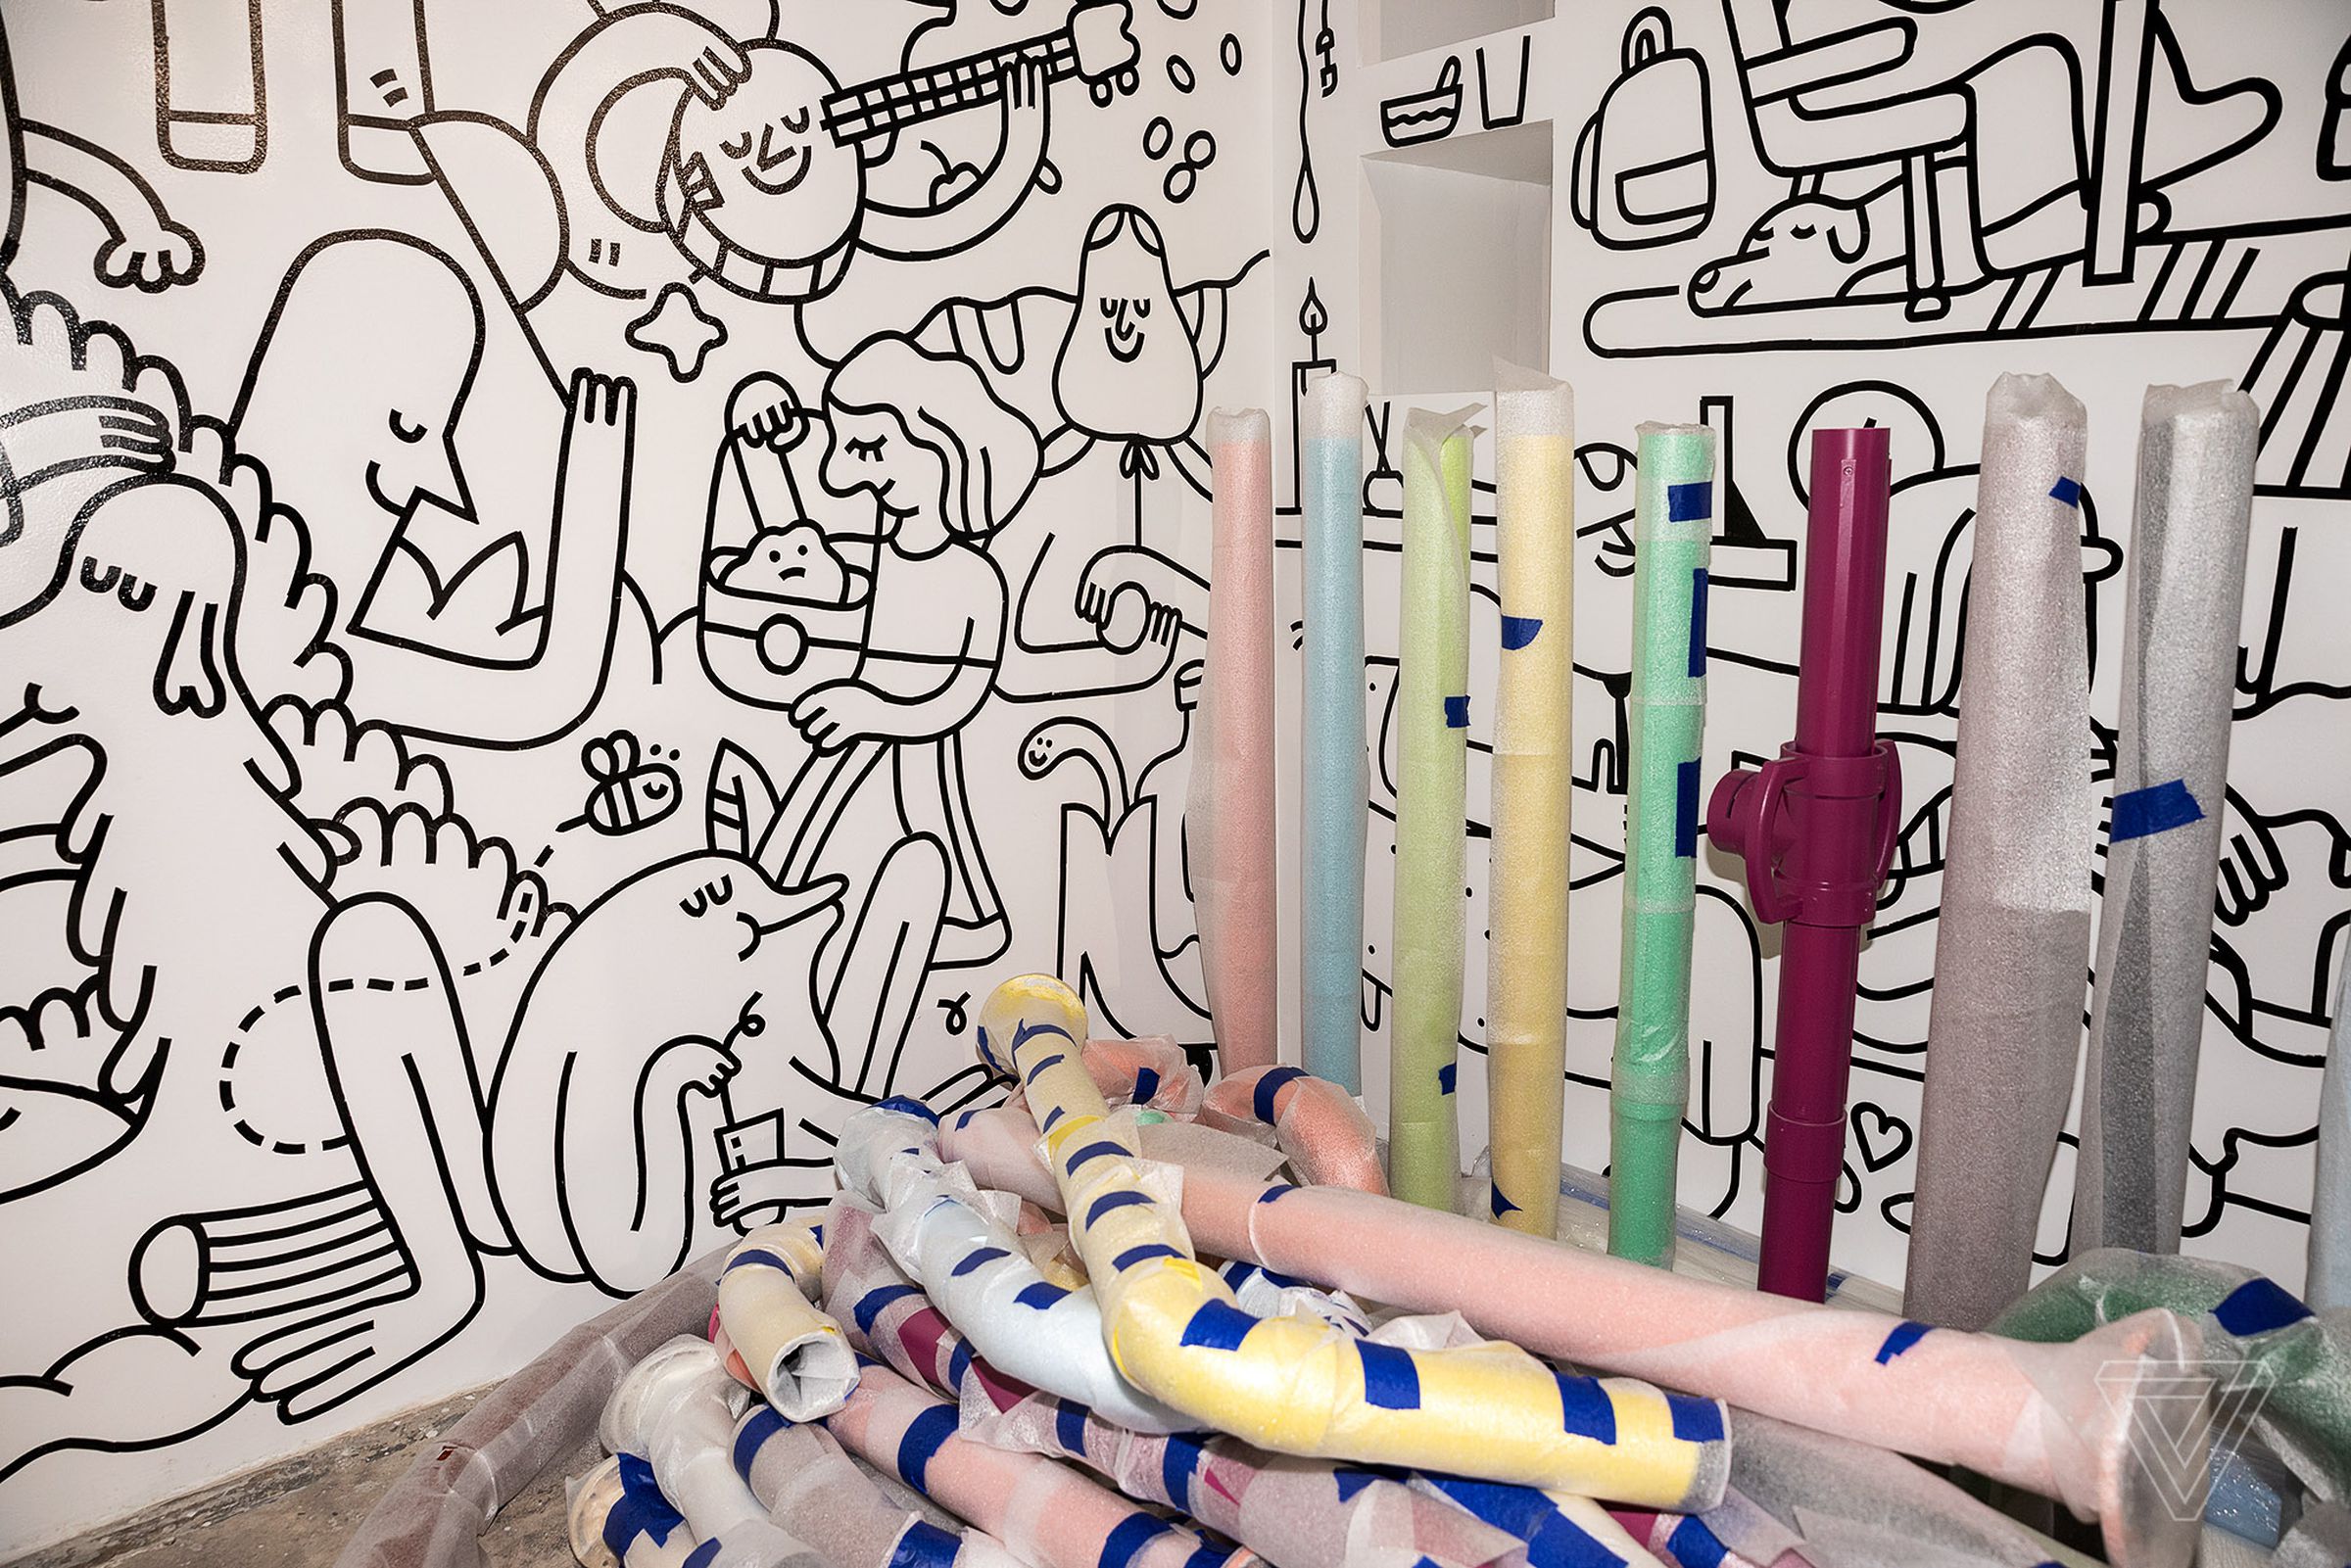 Visitors of the “Color Me ___” room are encouraged to use oversized markers to draw on the walls.